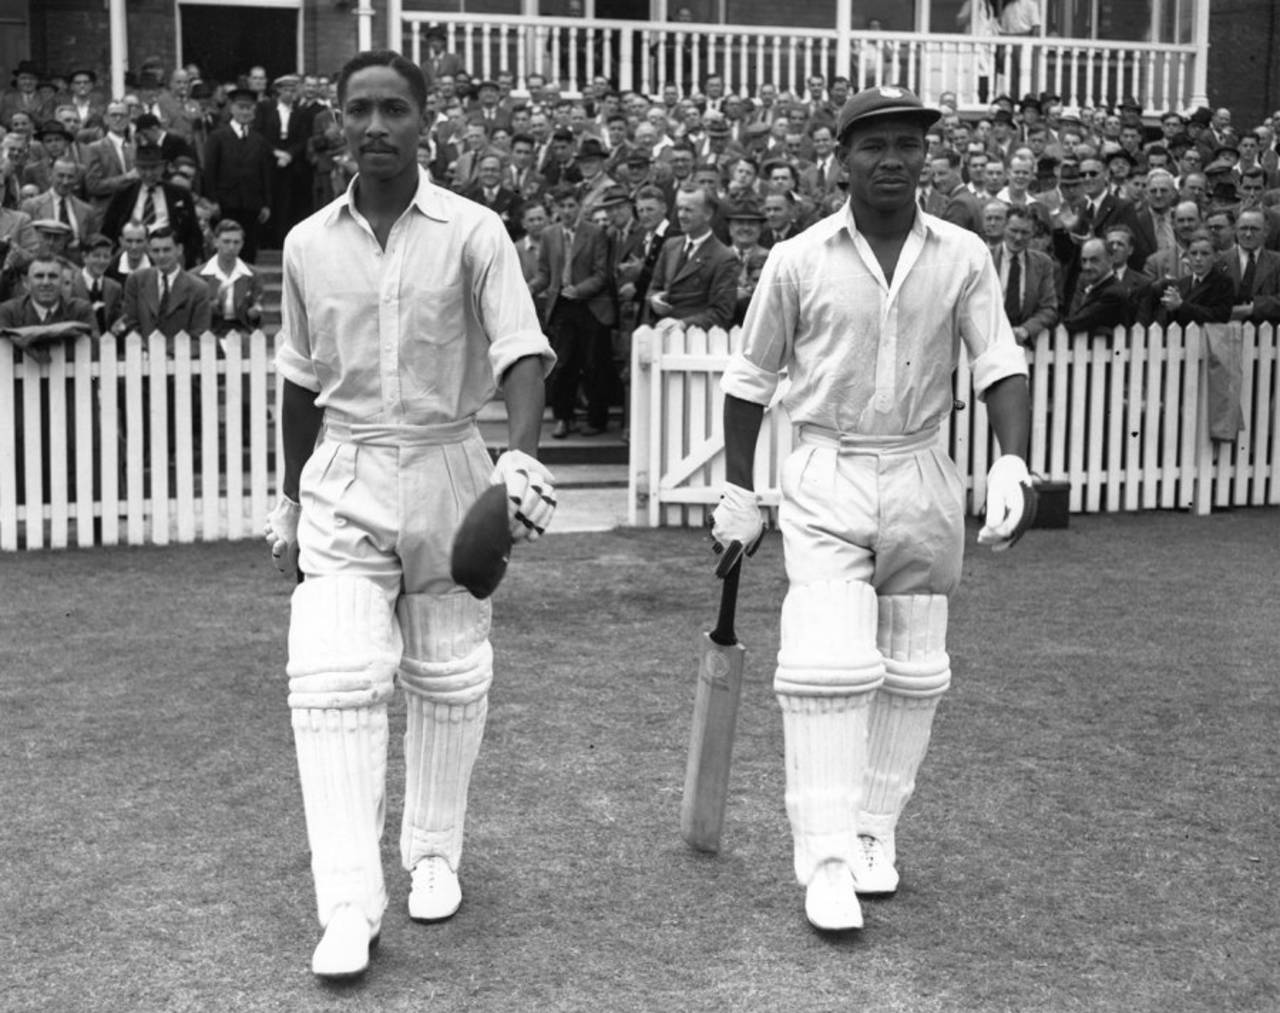 Frank Worrell (left) and Everton Weekes walk out to bat, England v West Indies, third Test, Trent Bridge, 22 July, 1950 